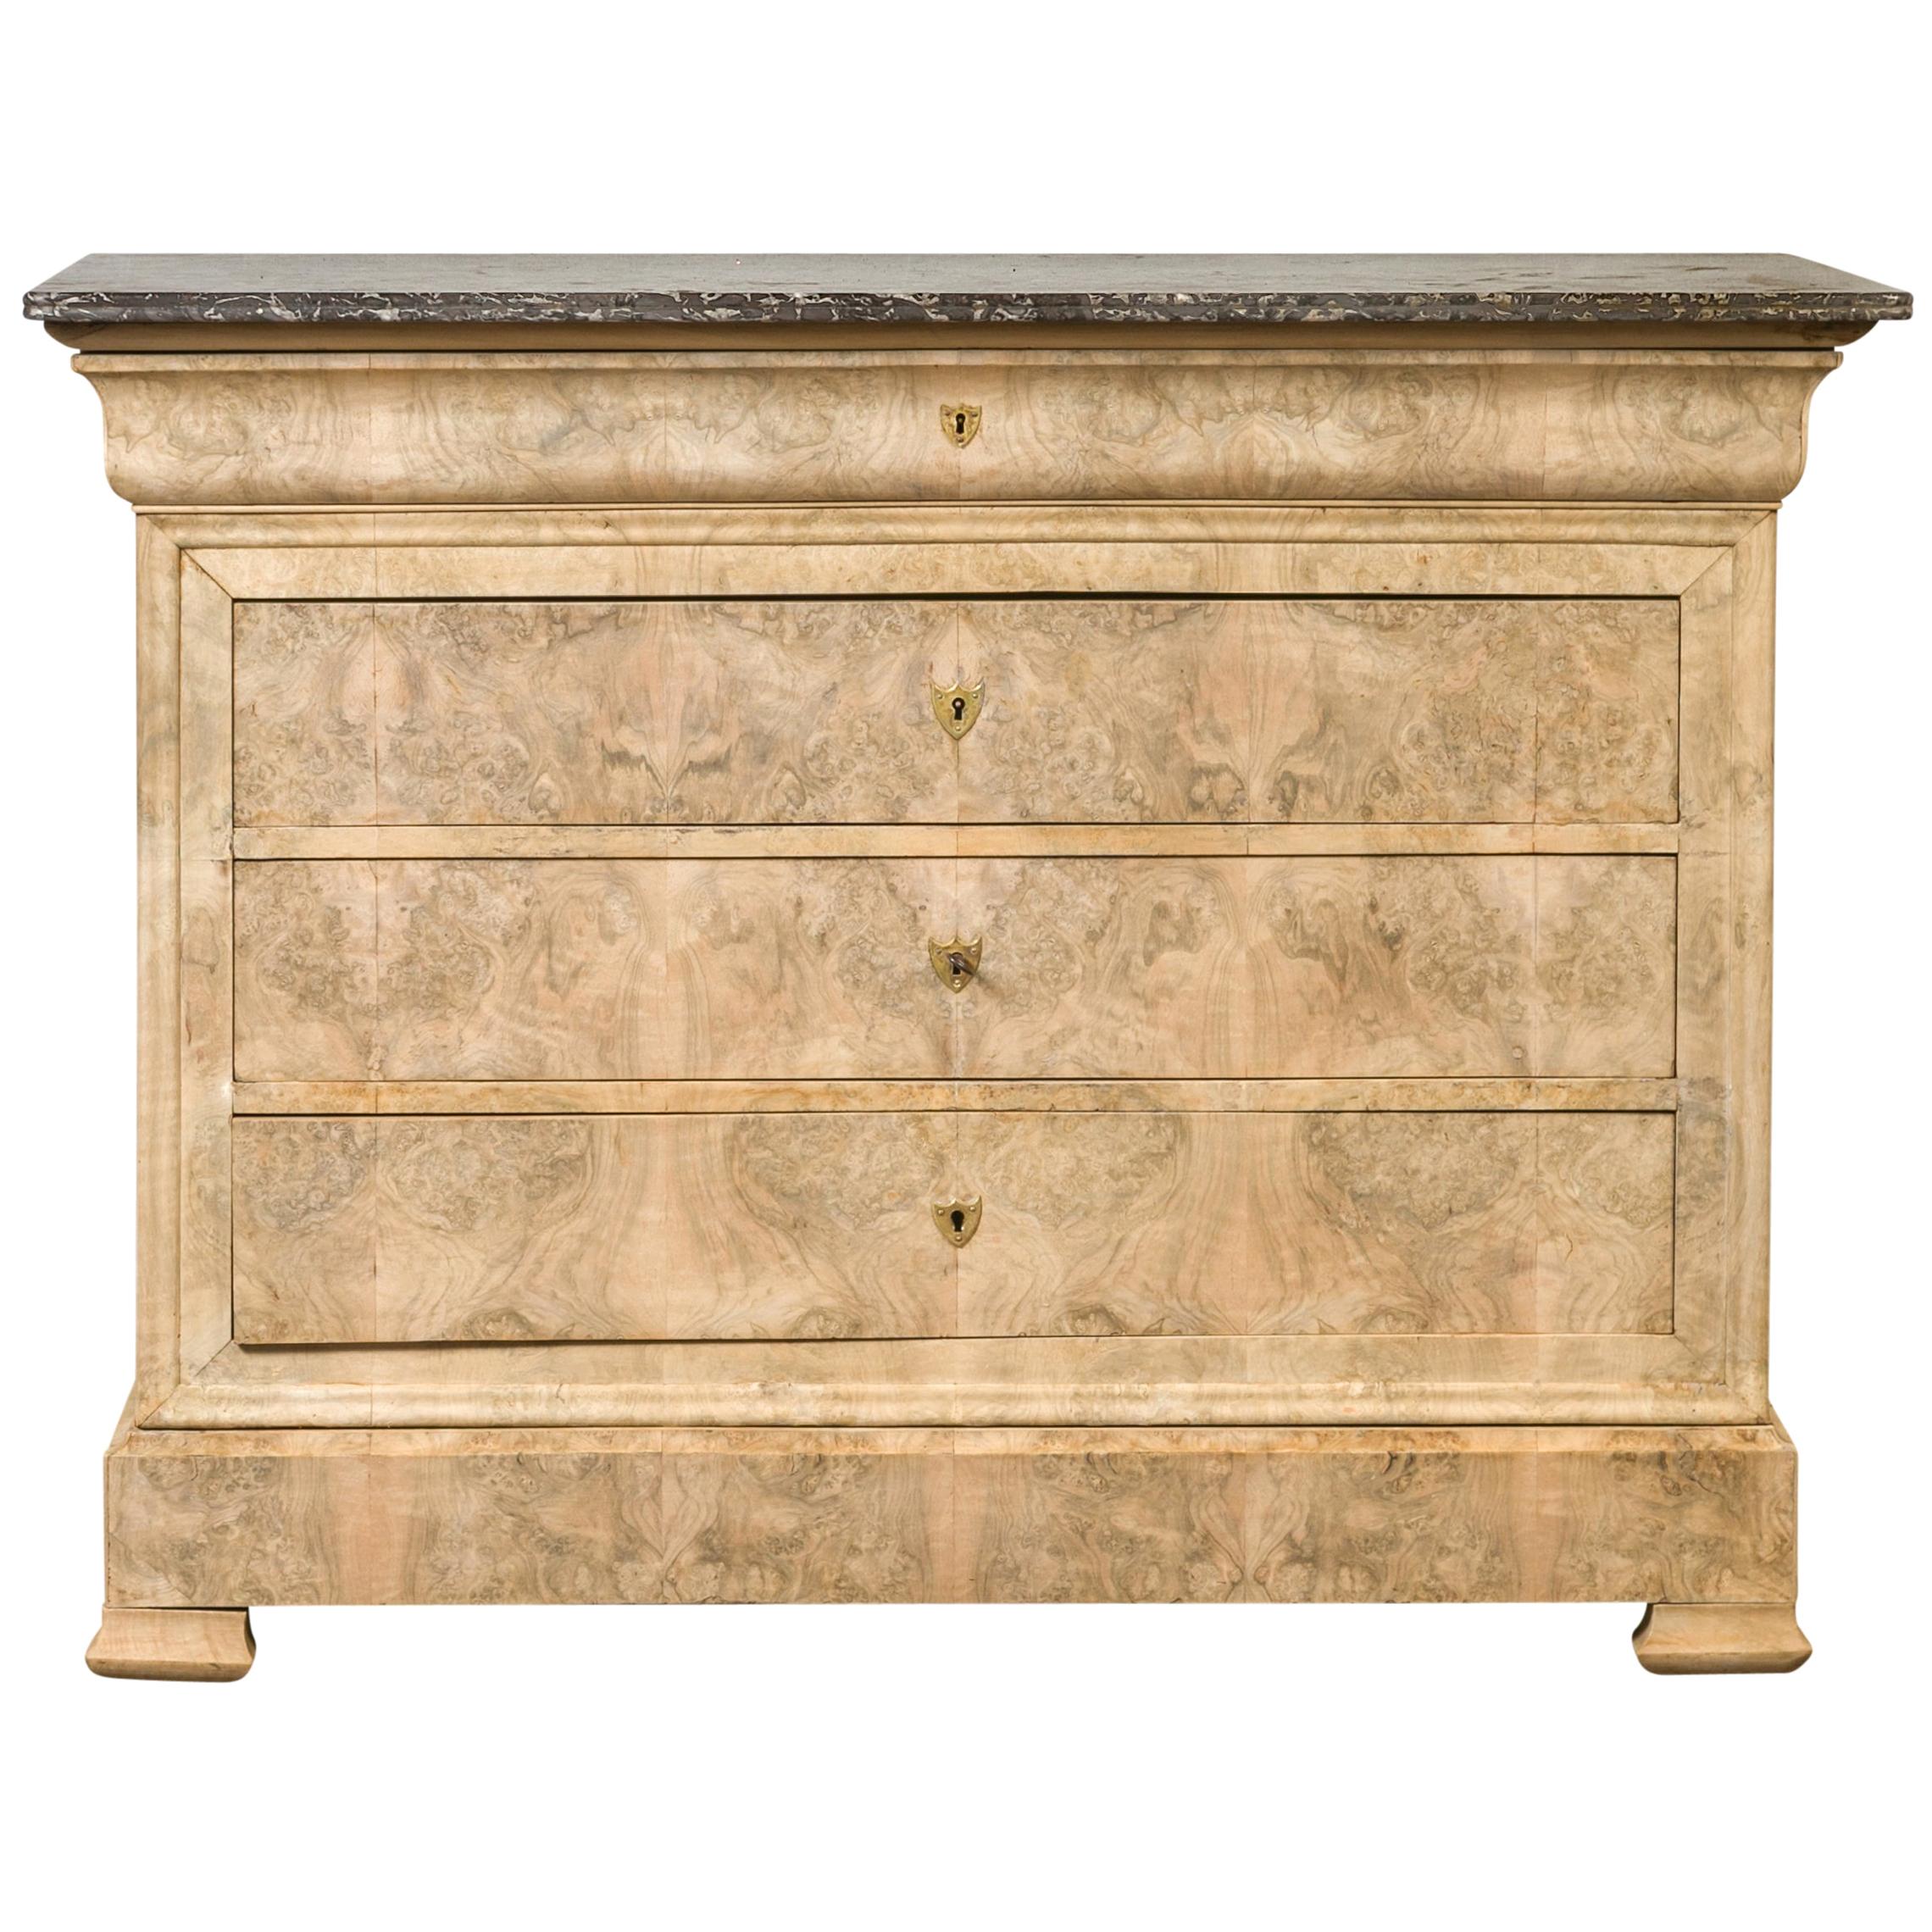 French 1870s Louis-Philippe Style Bleached Burl Veneer Commode with Marble Top